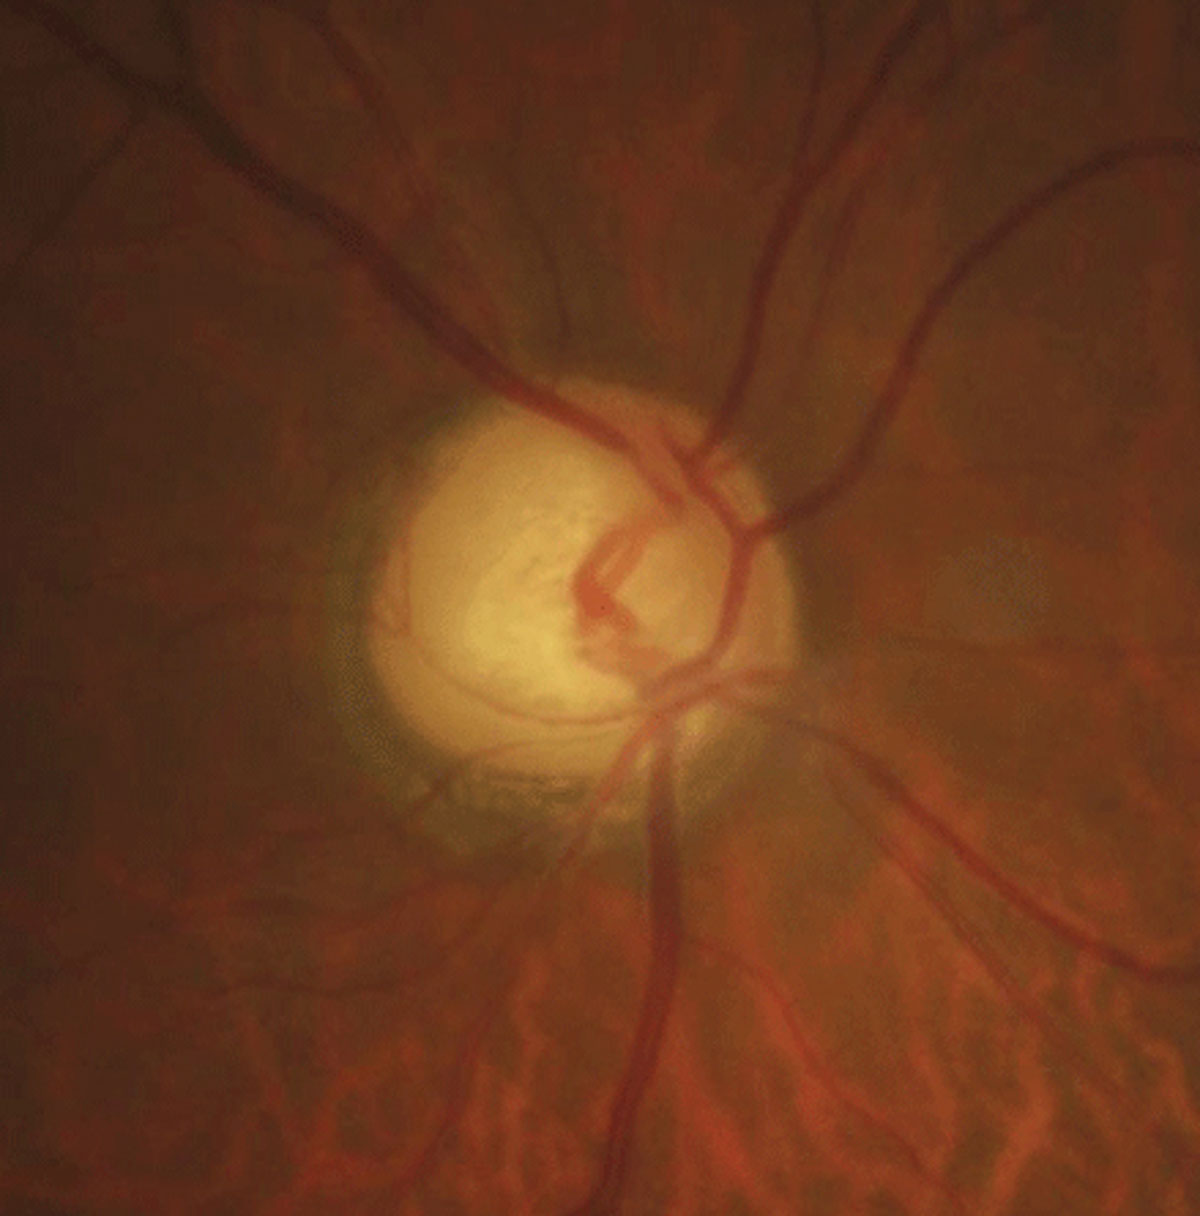 Optic disc crescent is much more common in those with high myopia, study shows. 